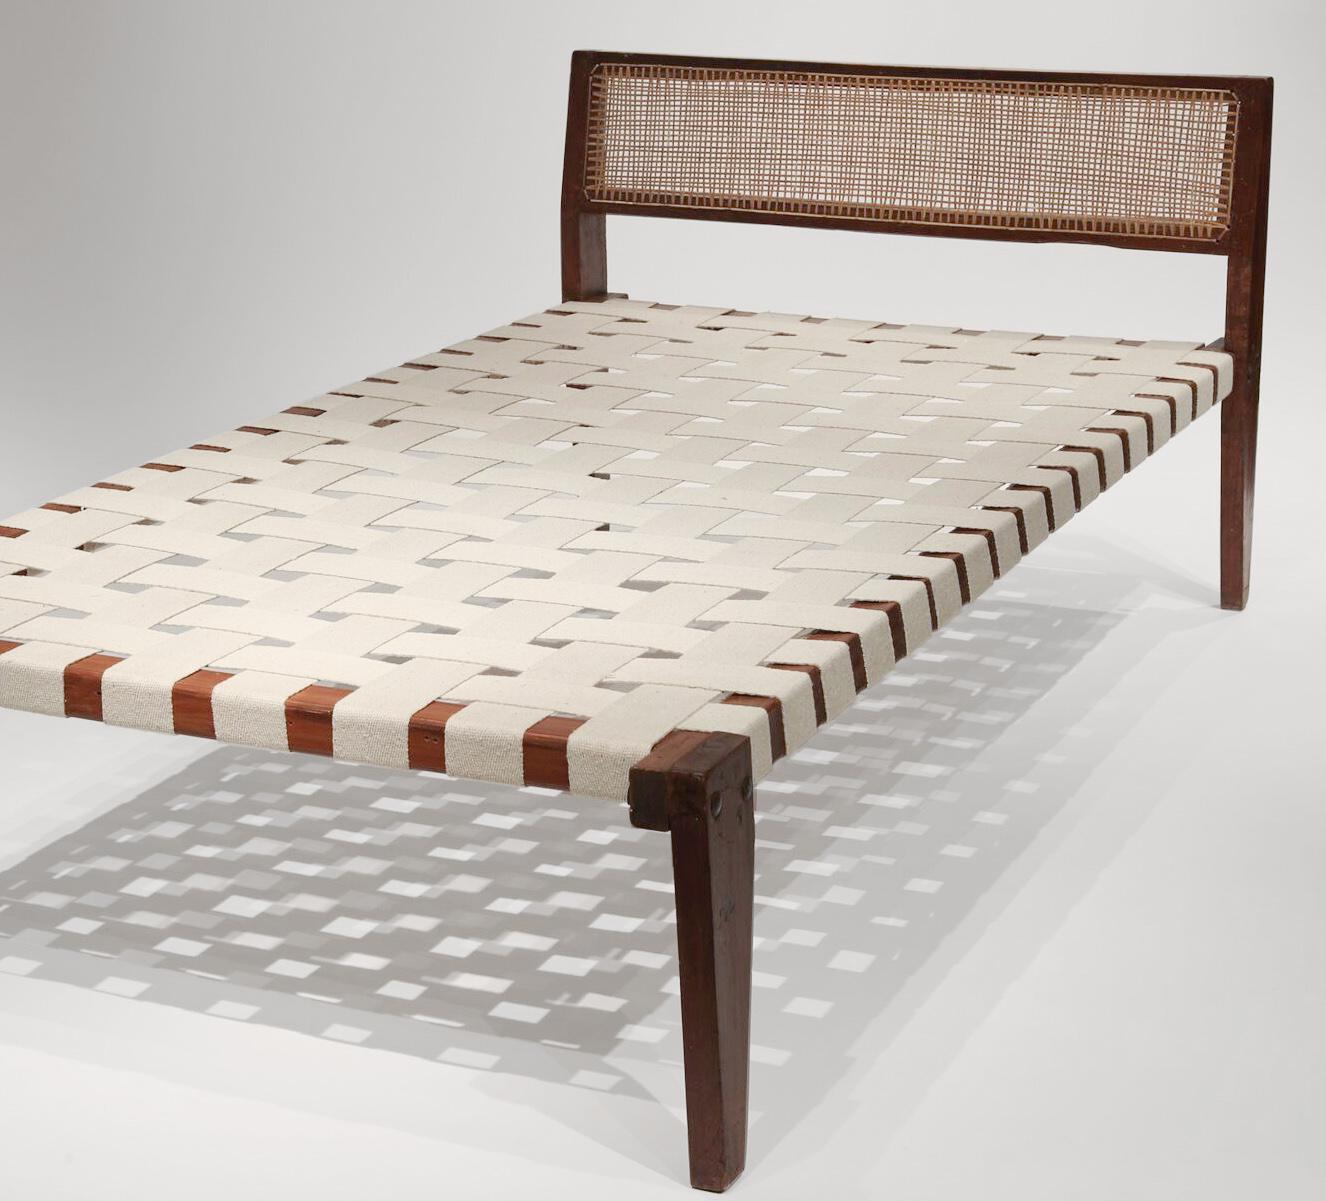 Pierre Jeanneret Daybed from administrative buildings Chandigarh, India. Teak frame, cane and woven strapping. Original finish, cushion has been recovered in button tufted grey fabric with cream piping. Good to very good overall condition, circa